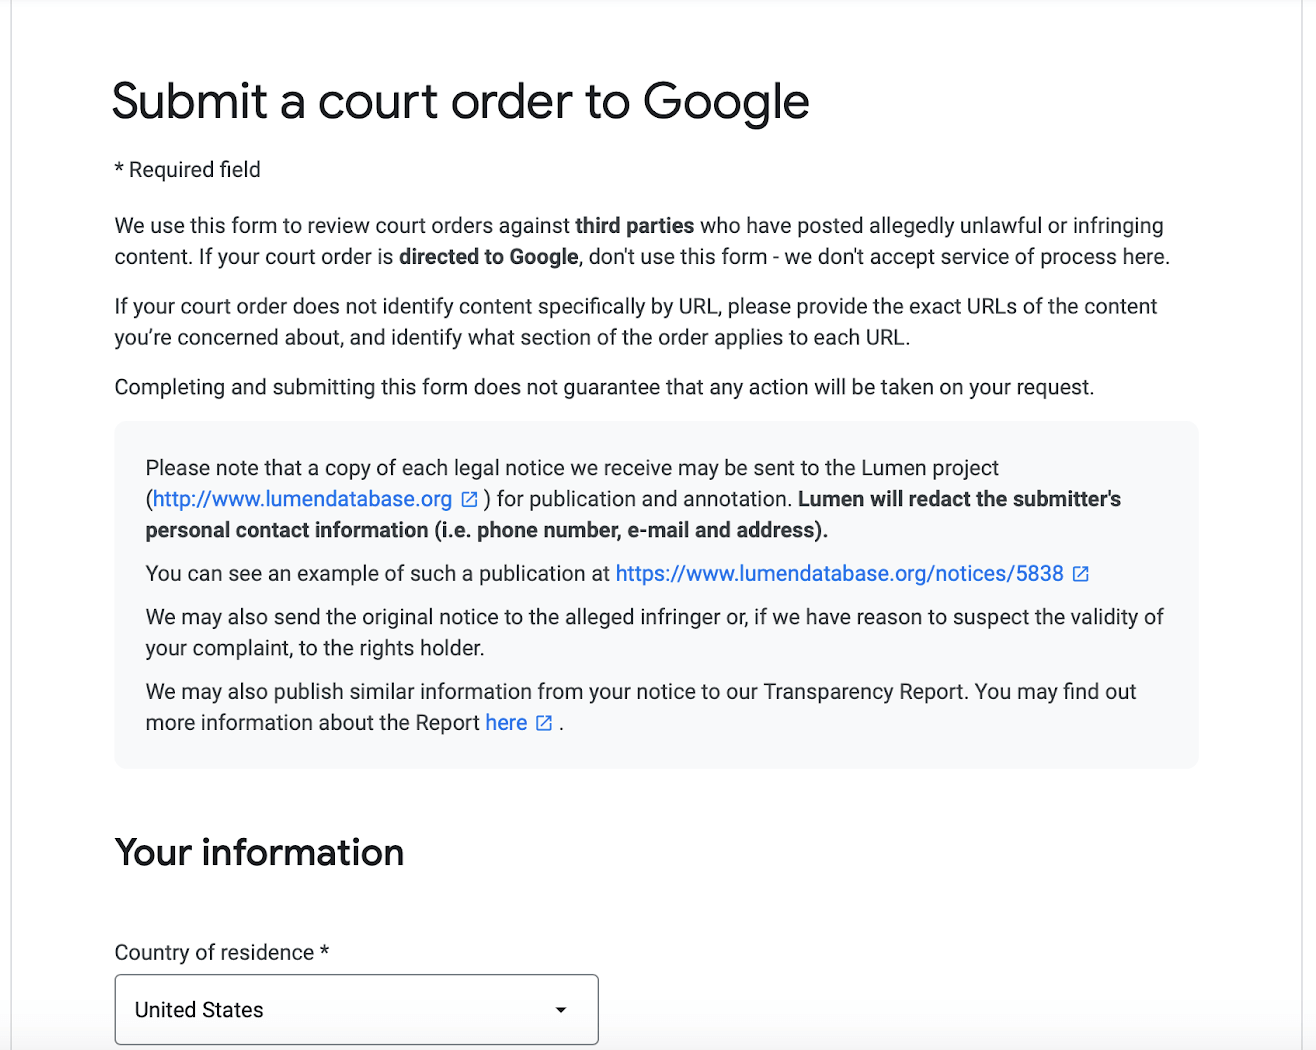 Submit a court order to Google information form